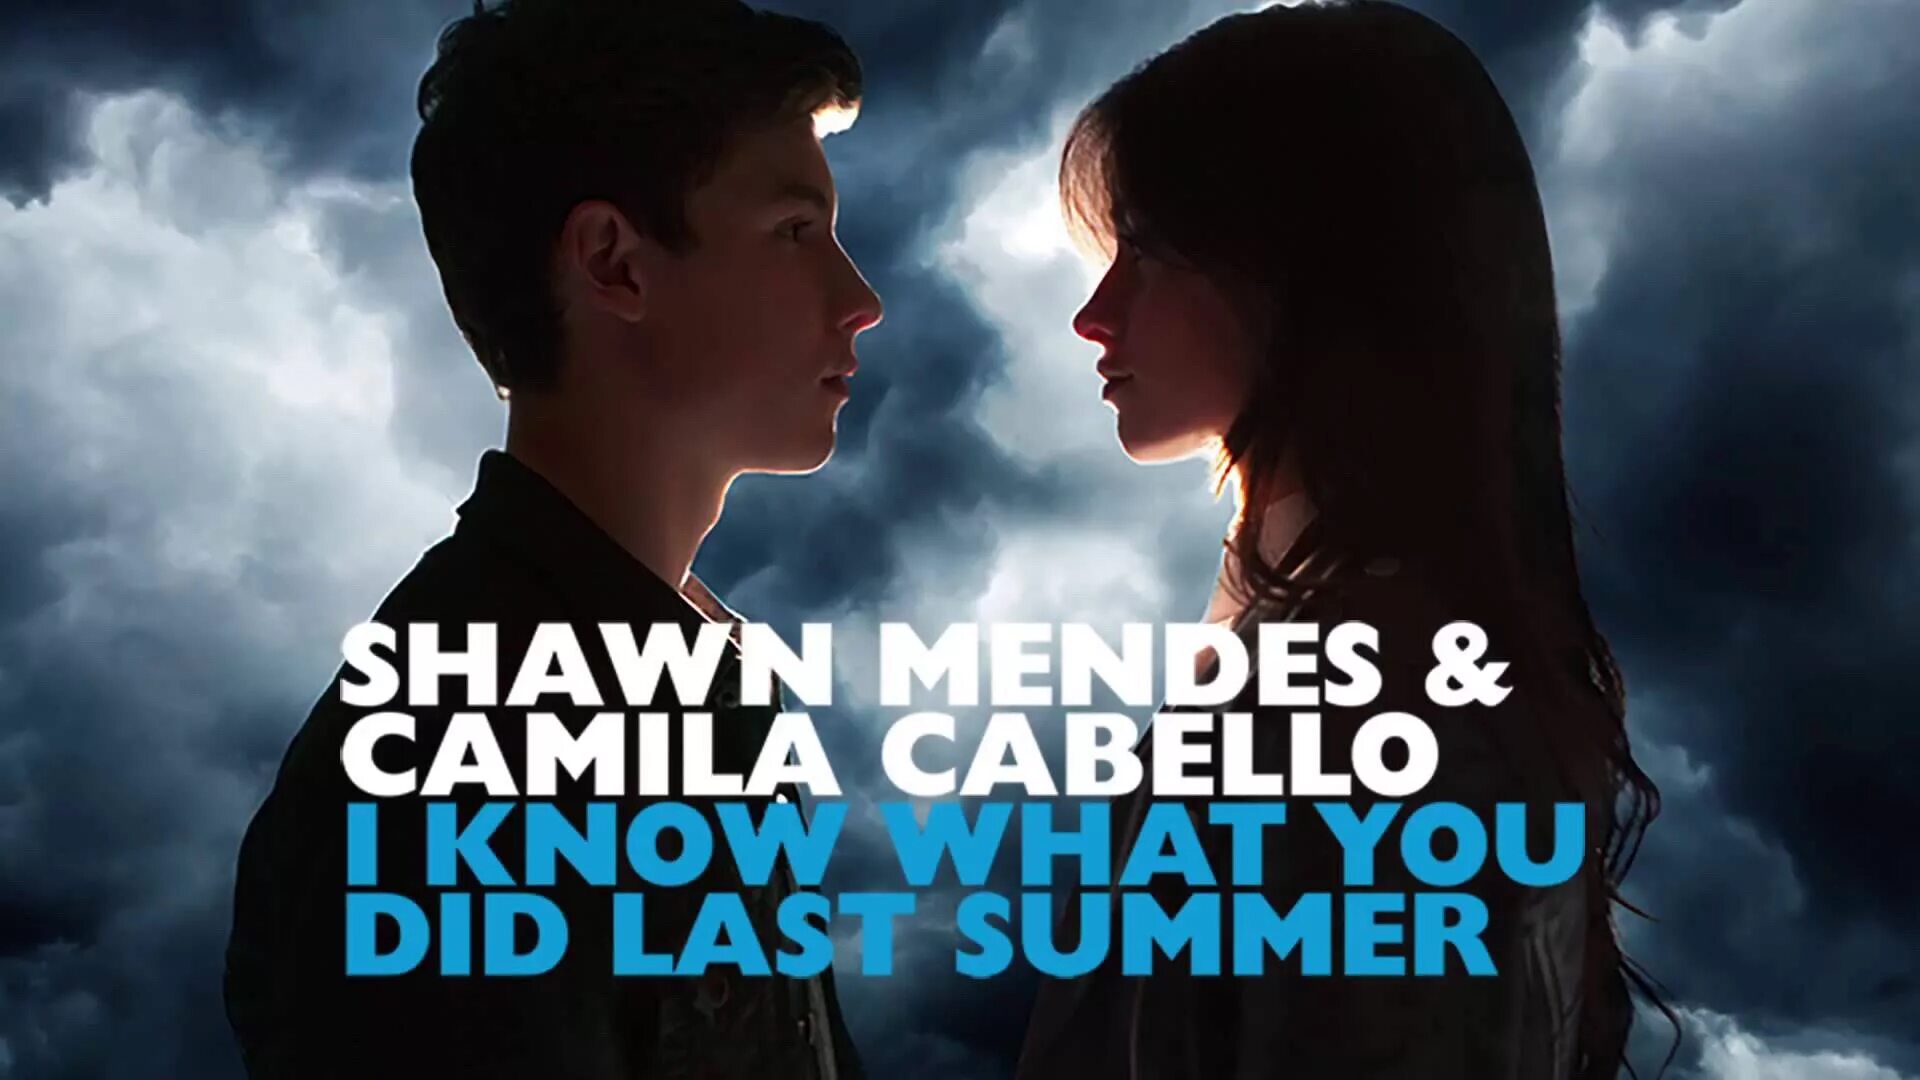 Camila Cabello last Summer. Shawn Mendes & Camila Cabello - i know what you did last Summer. I know what you did last Summer песня. I know what you did. What u been doing